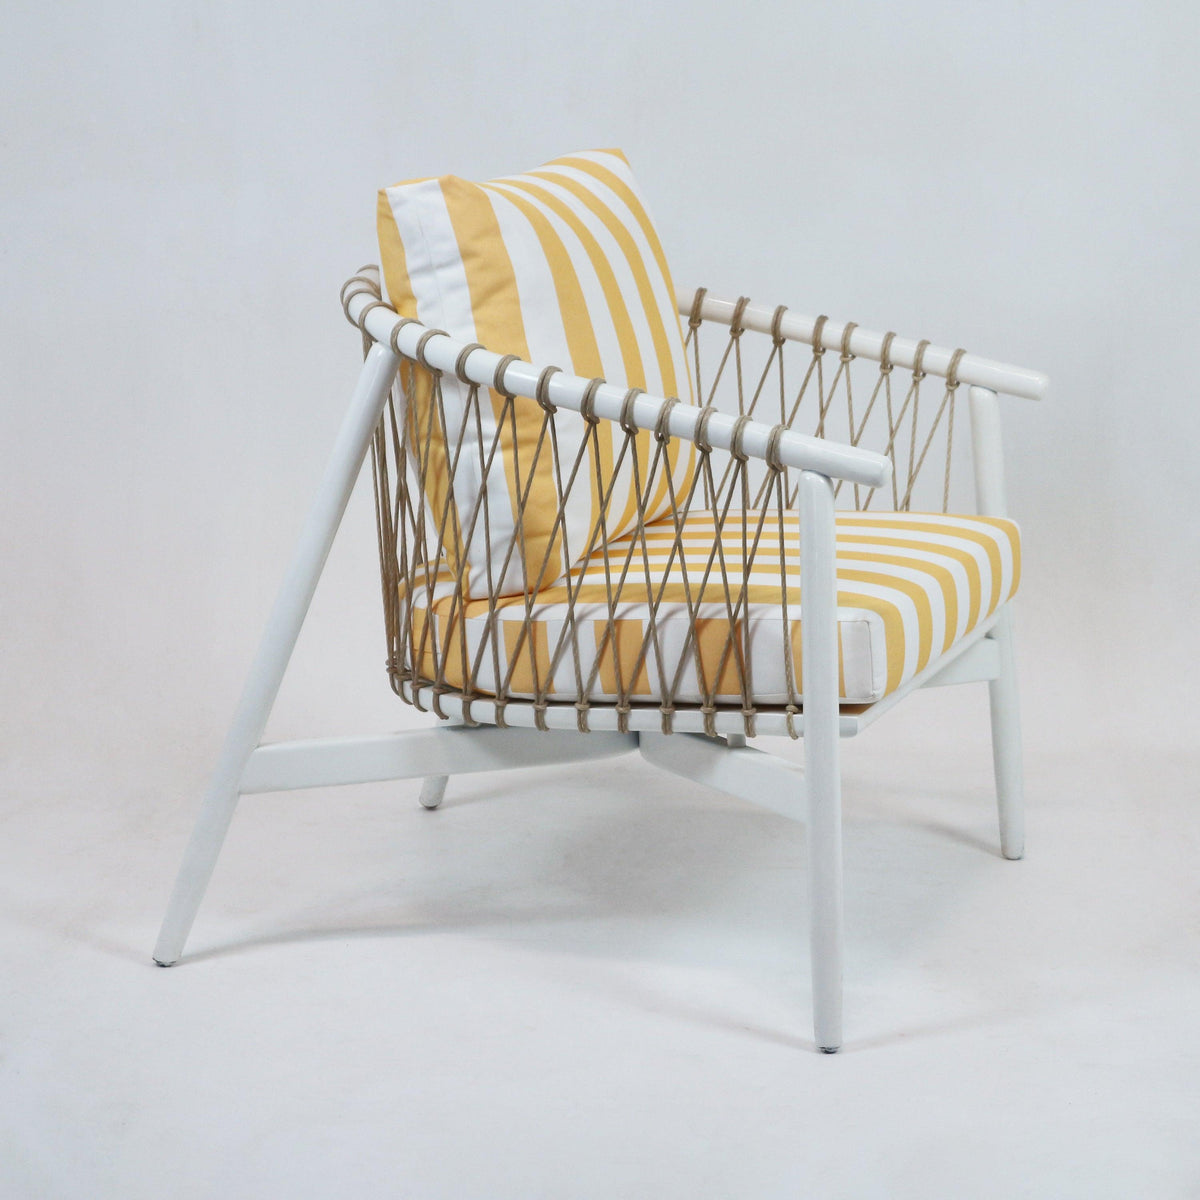 Mevcali Lounge Chair with Summer Stripe Upholstery